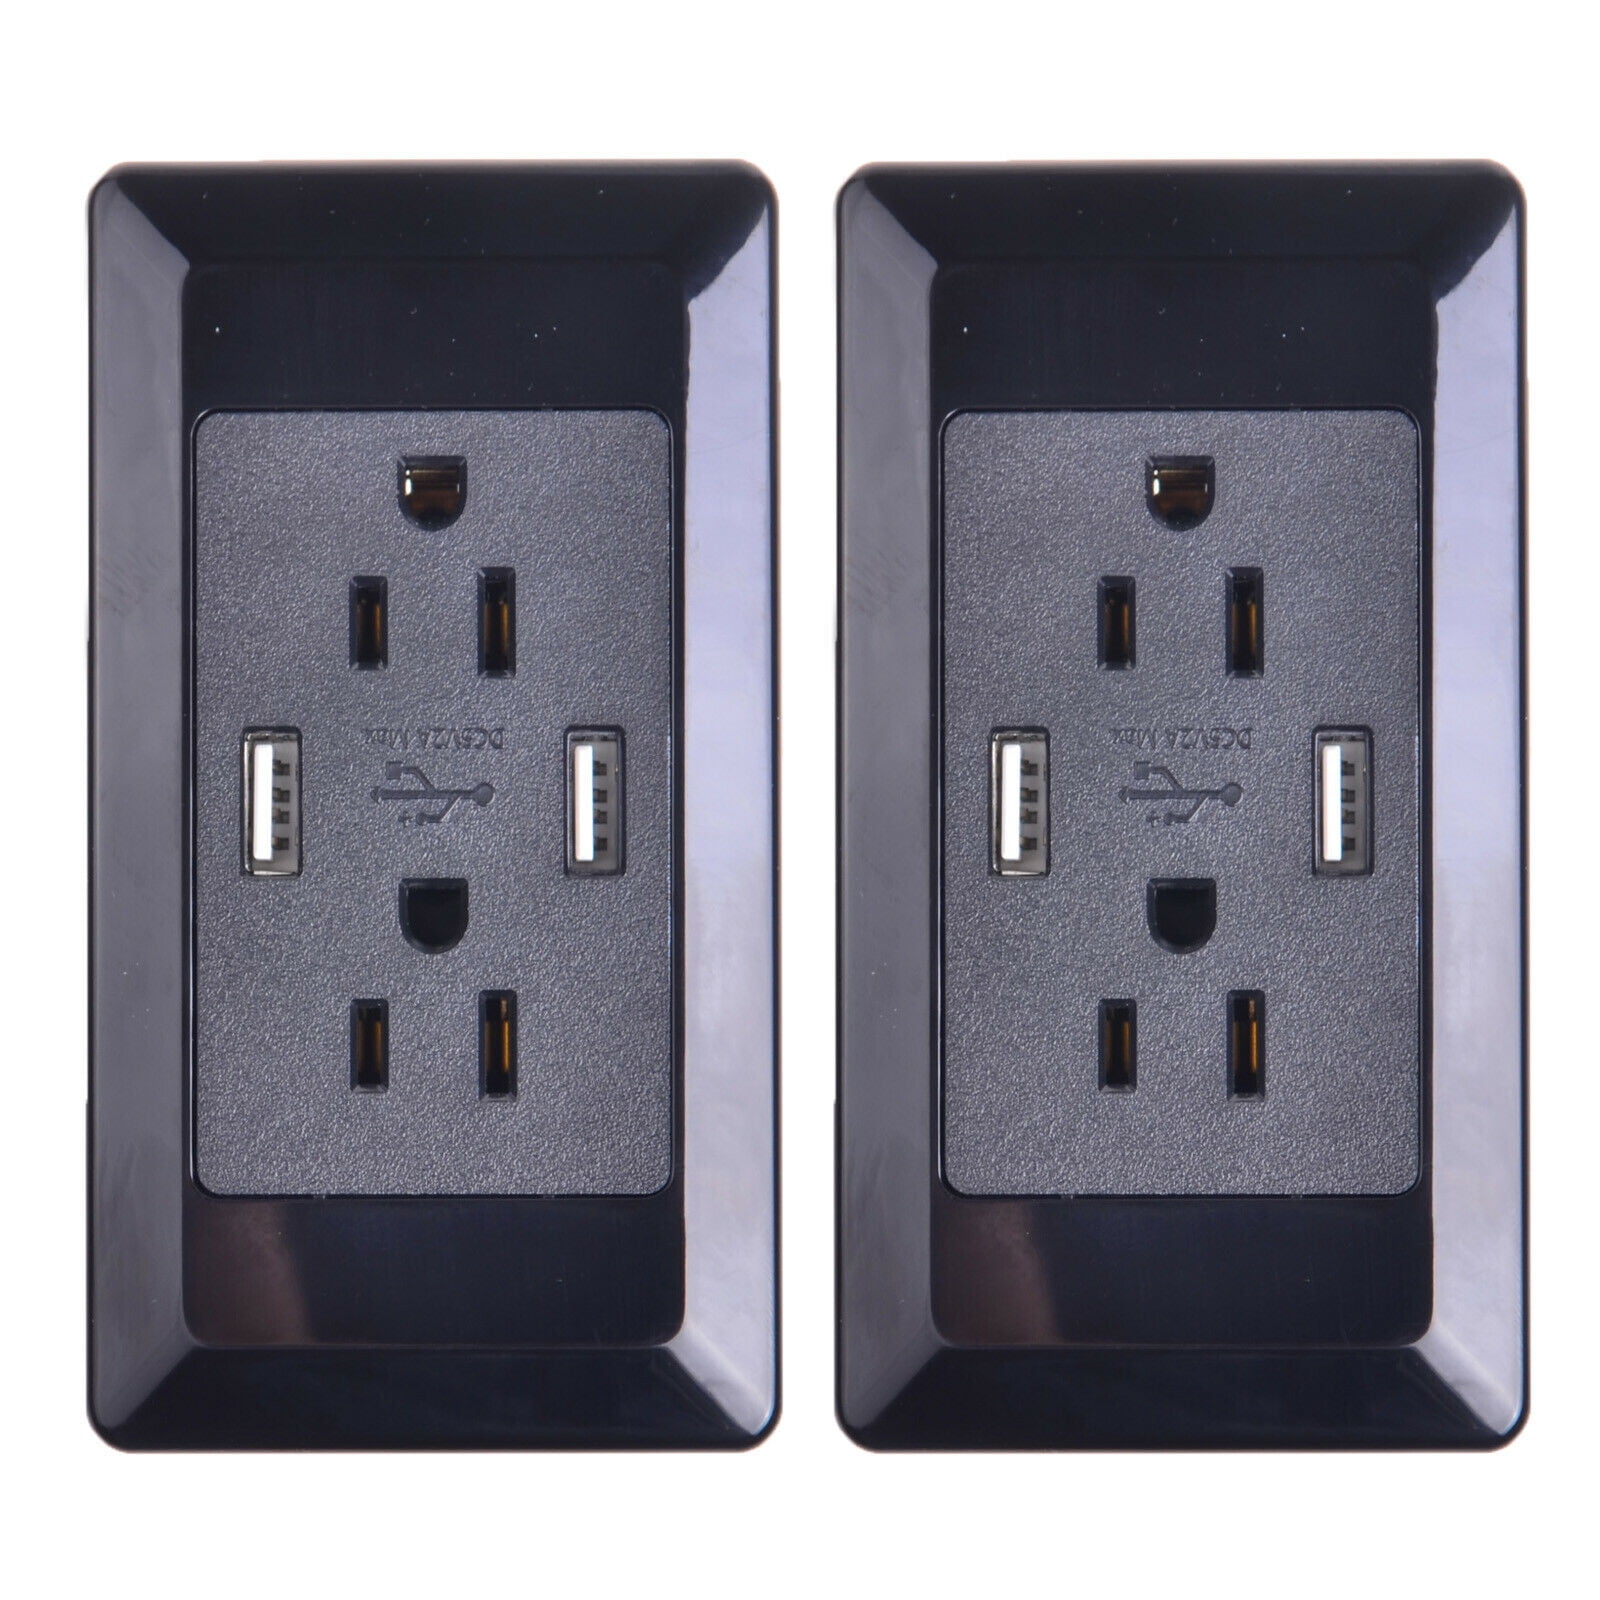 2 packs Dual USB Port Wall Socket Charger AC Power Receptacle Outlet Plate Panel 